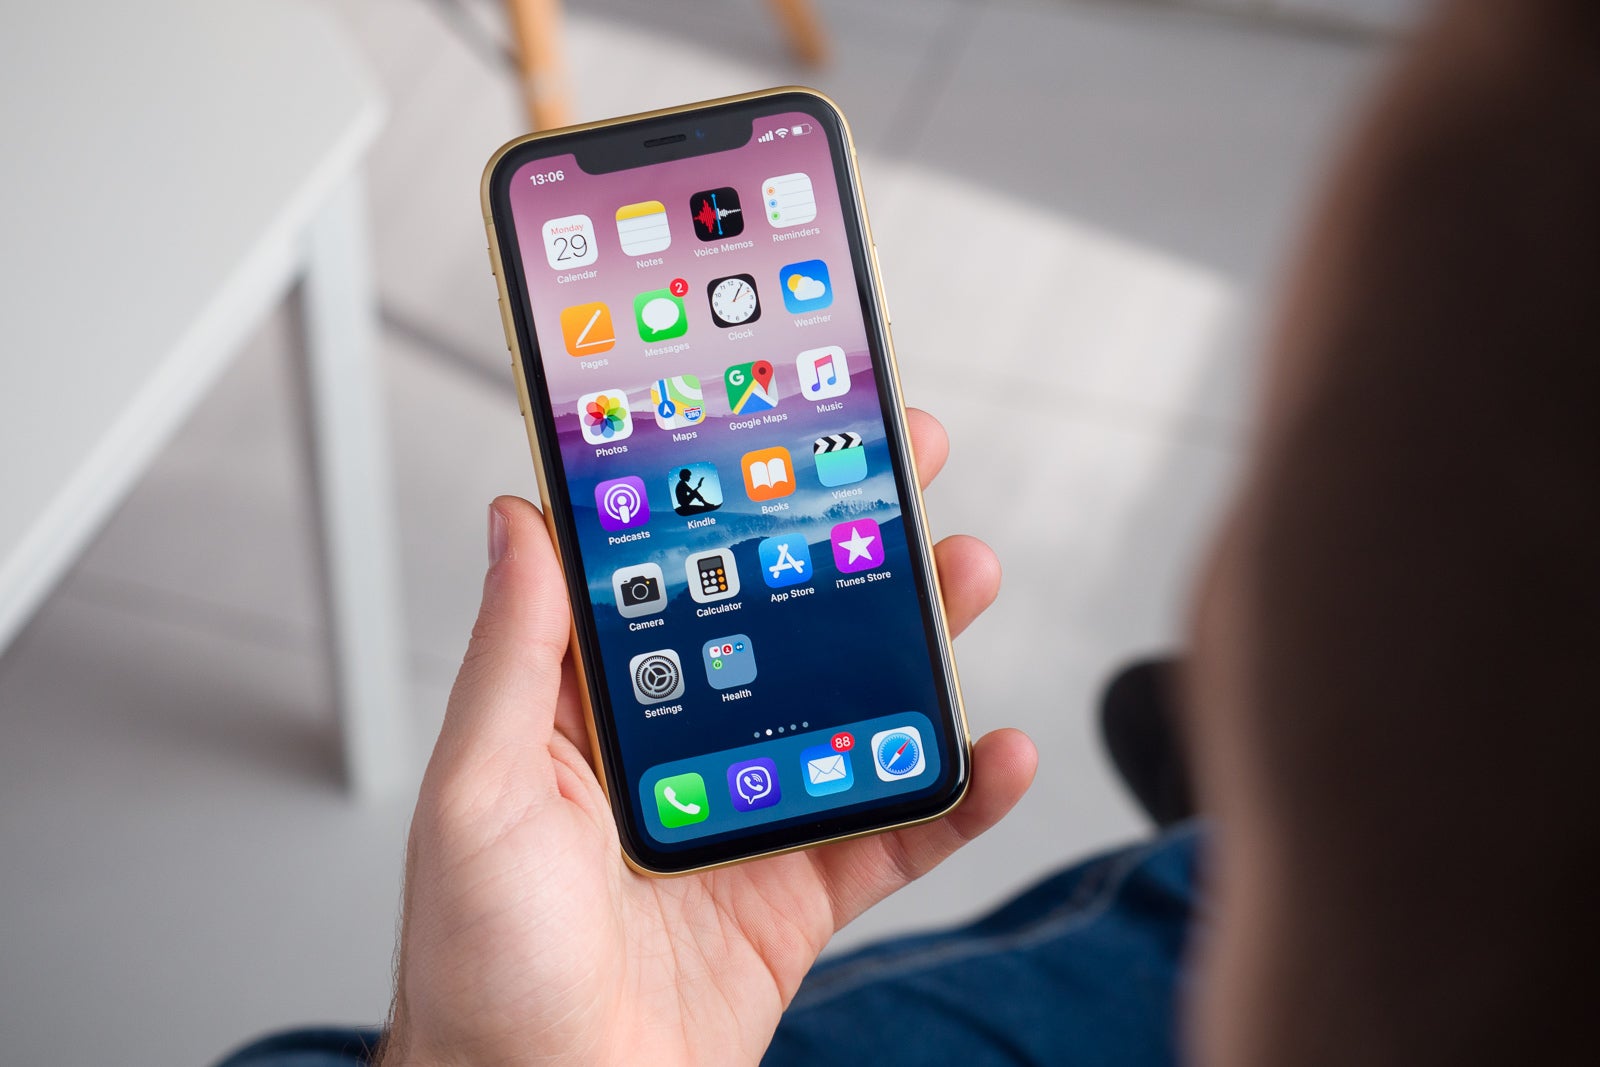 Say goodbye to the iPhone XR&#039;s bigger bezels in 2020 - Future iPhones could carry next-gen display tech developed by Foxconn